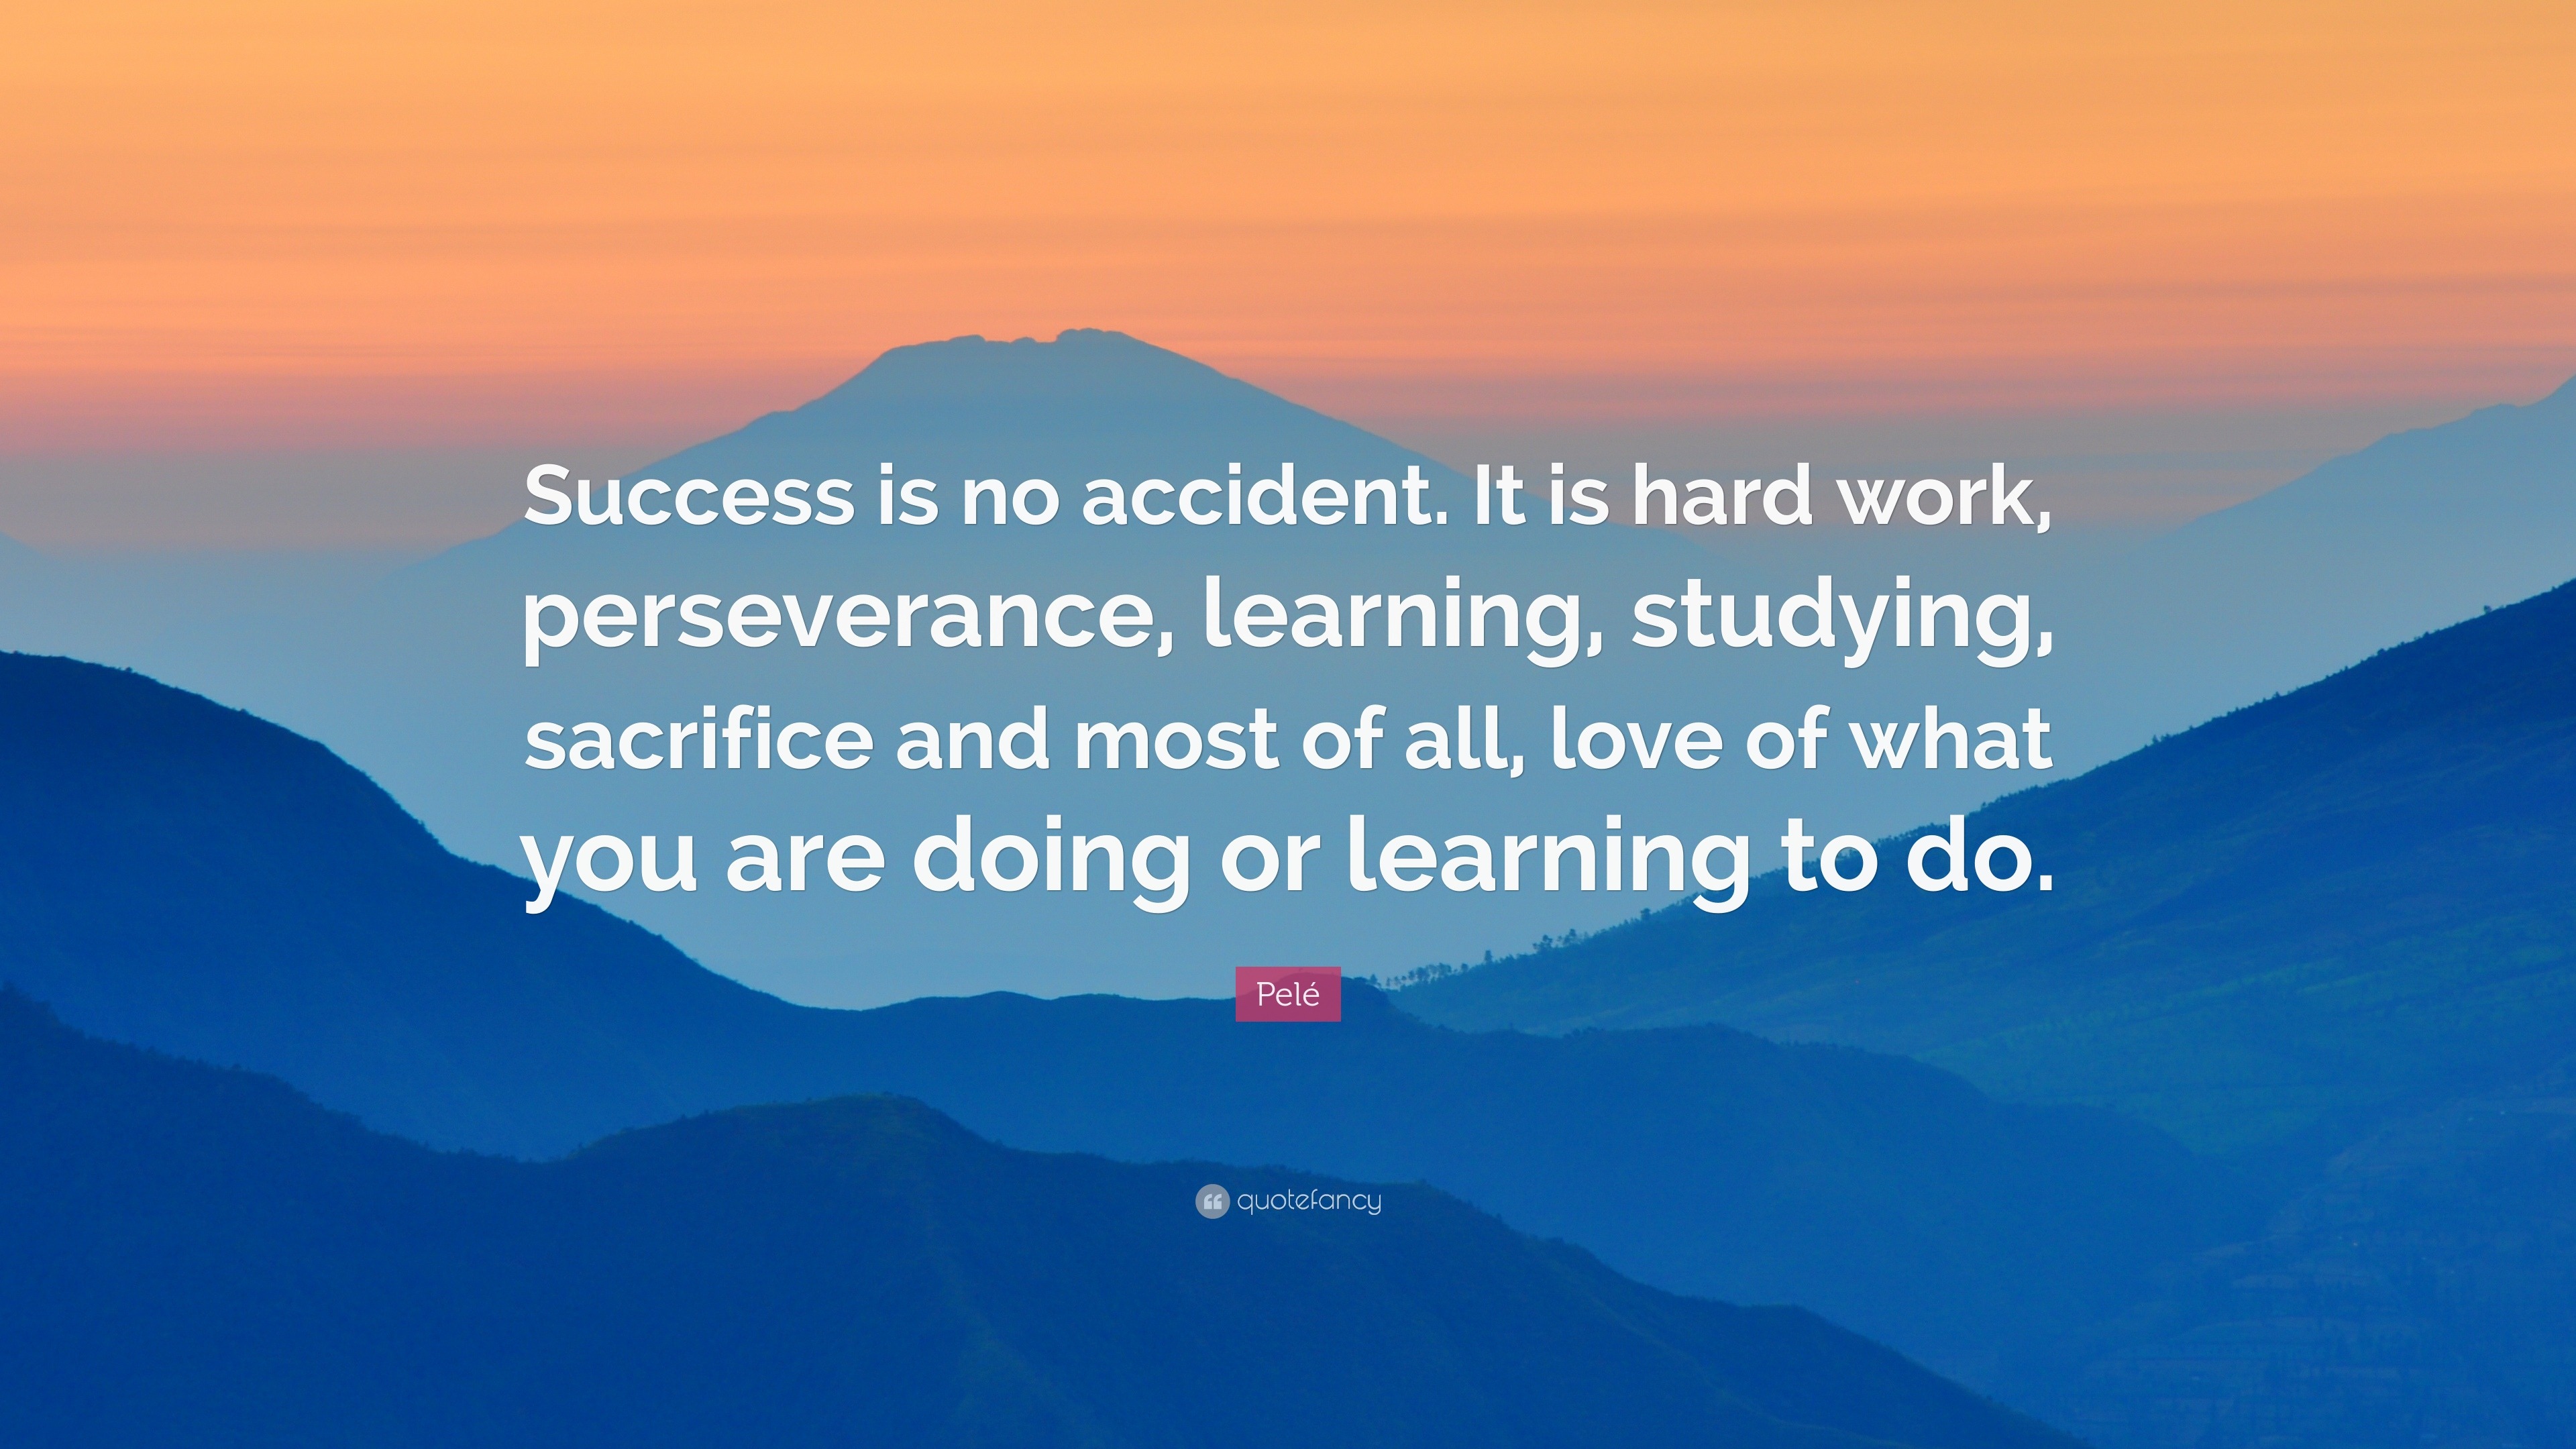 Image result for pele quote on success